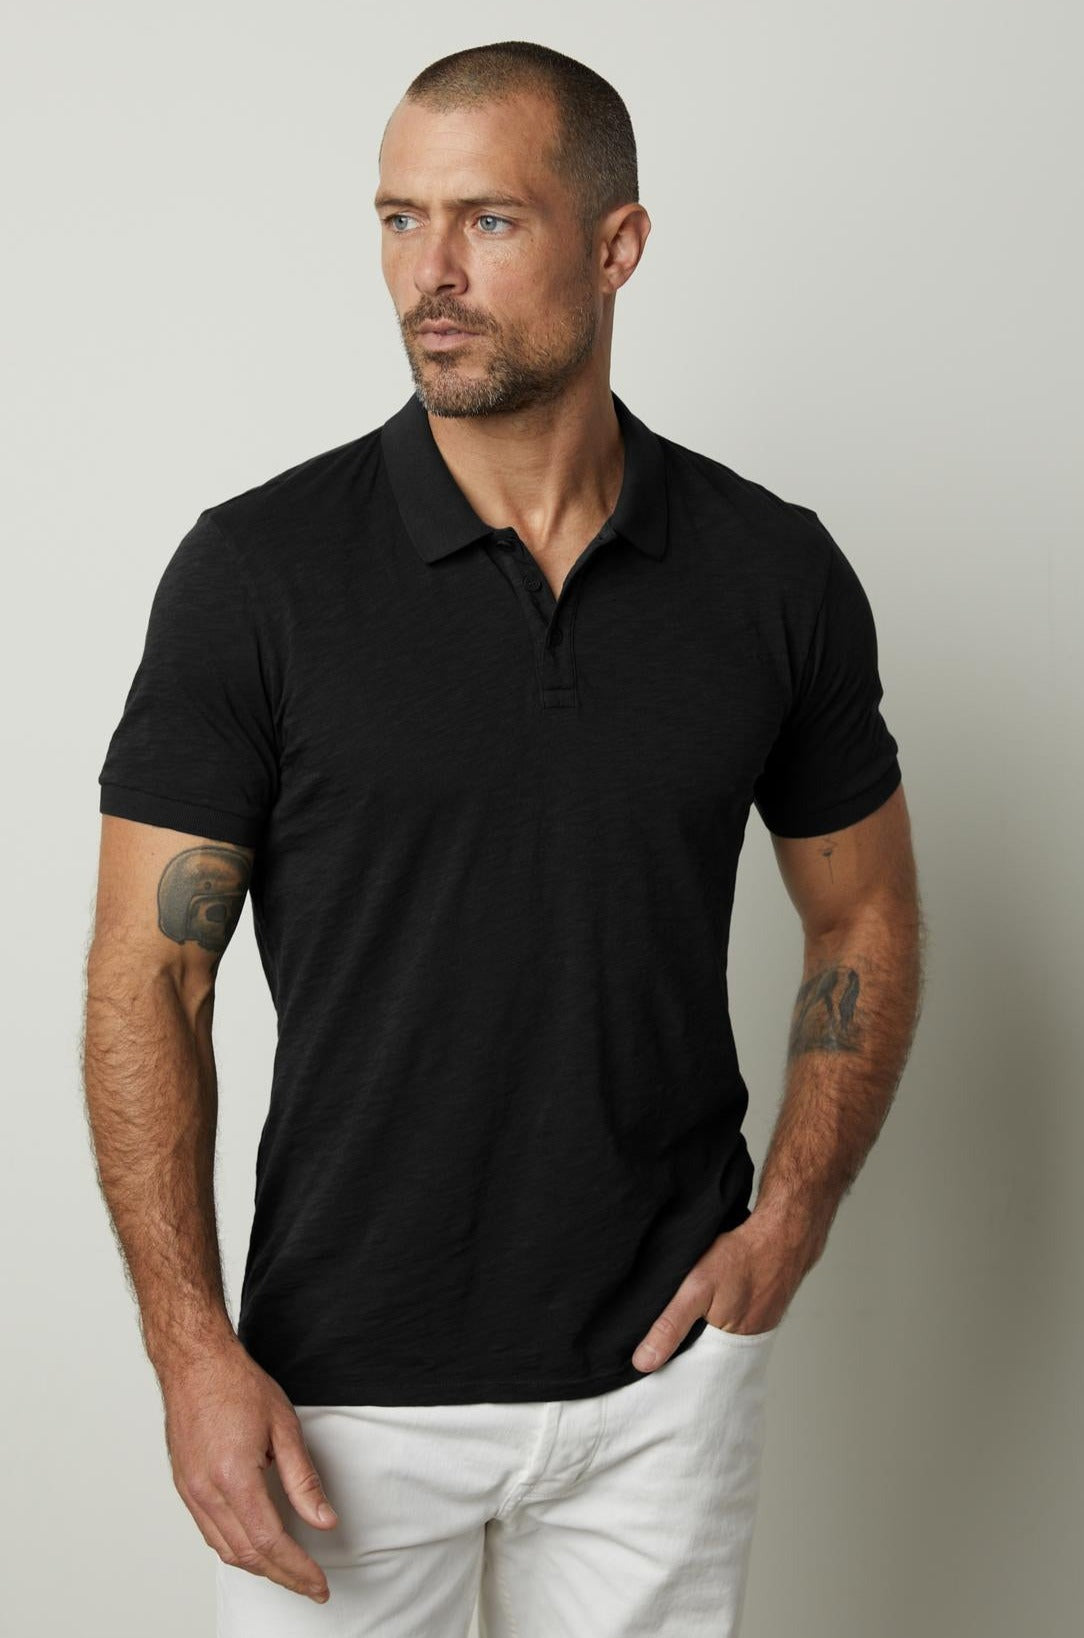 A man wearing a black NIKO POLO shirt by Velvet by Graham & Spencer and white pants.-26706093179073